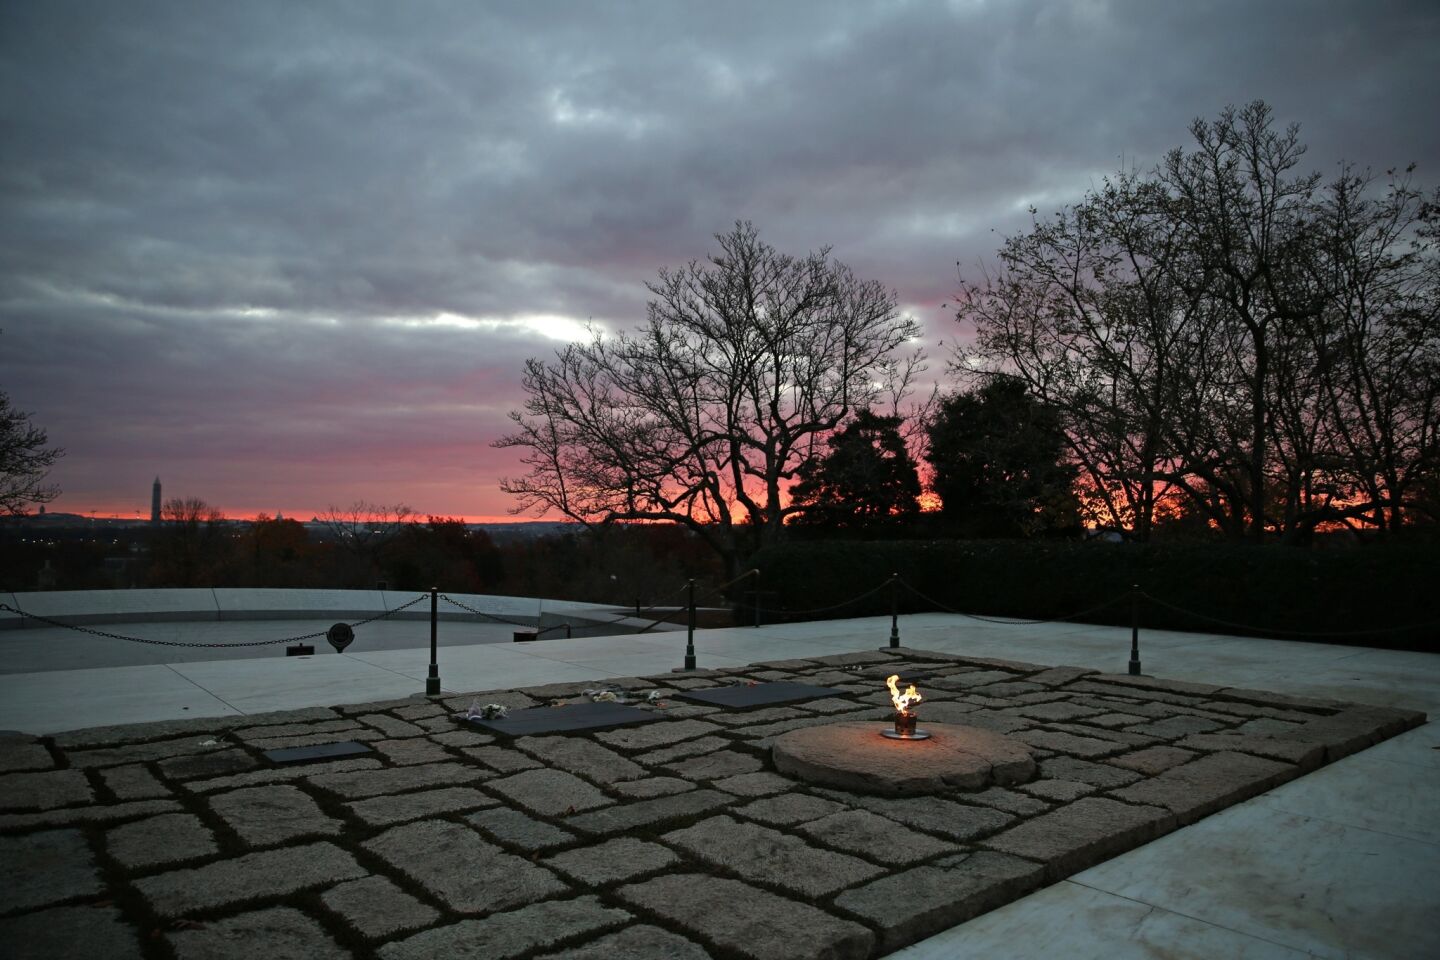 The eternal flame burns at the grave site of President John F. Kennedy, on the 50th anniversary of his death at Arlington National Cemetery.